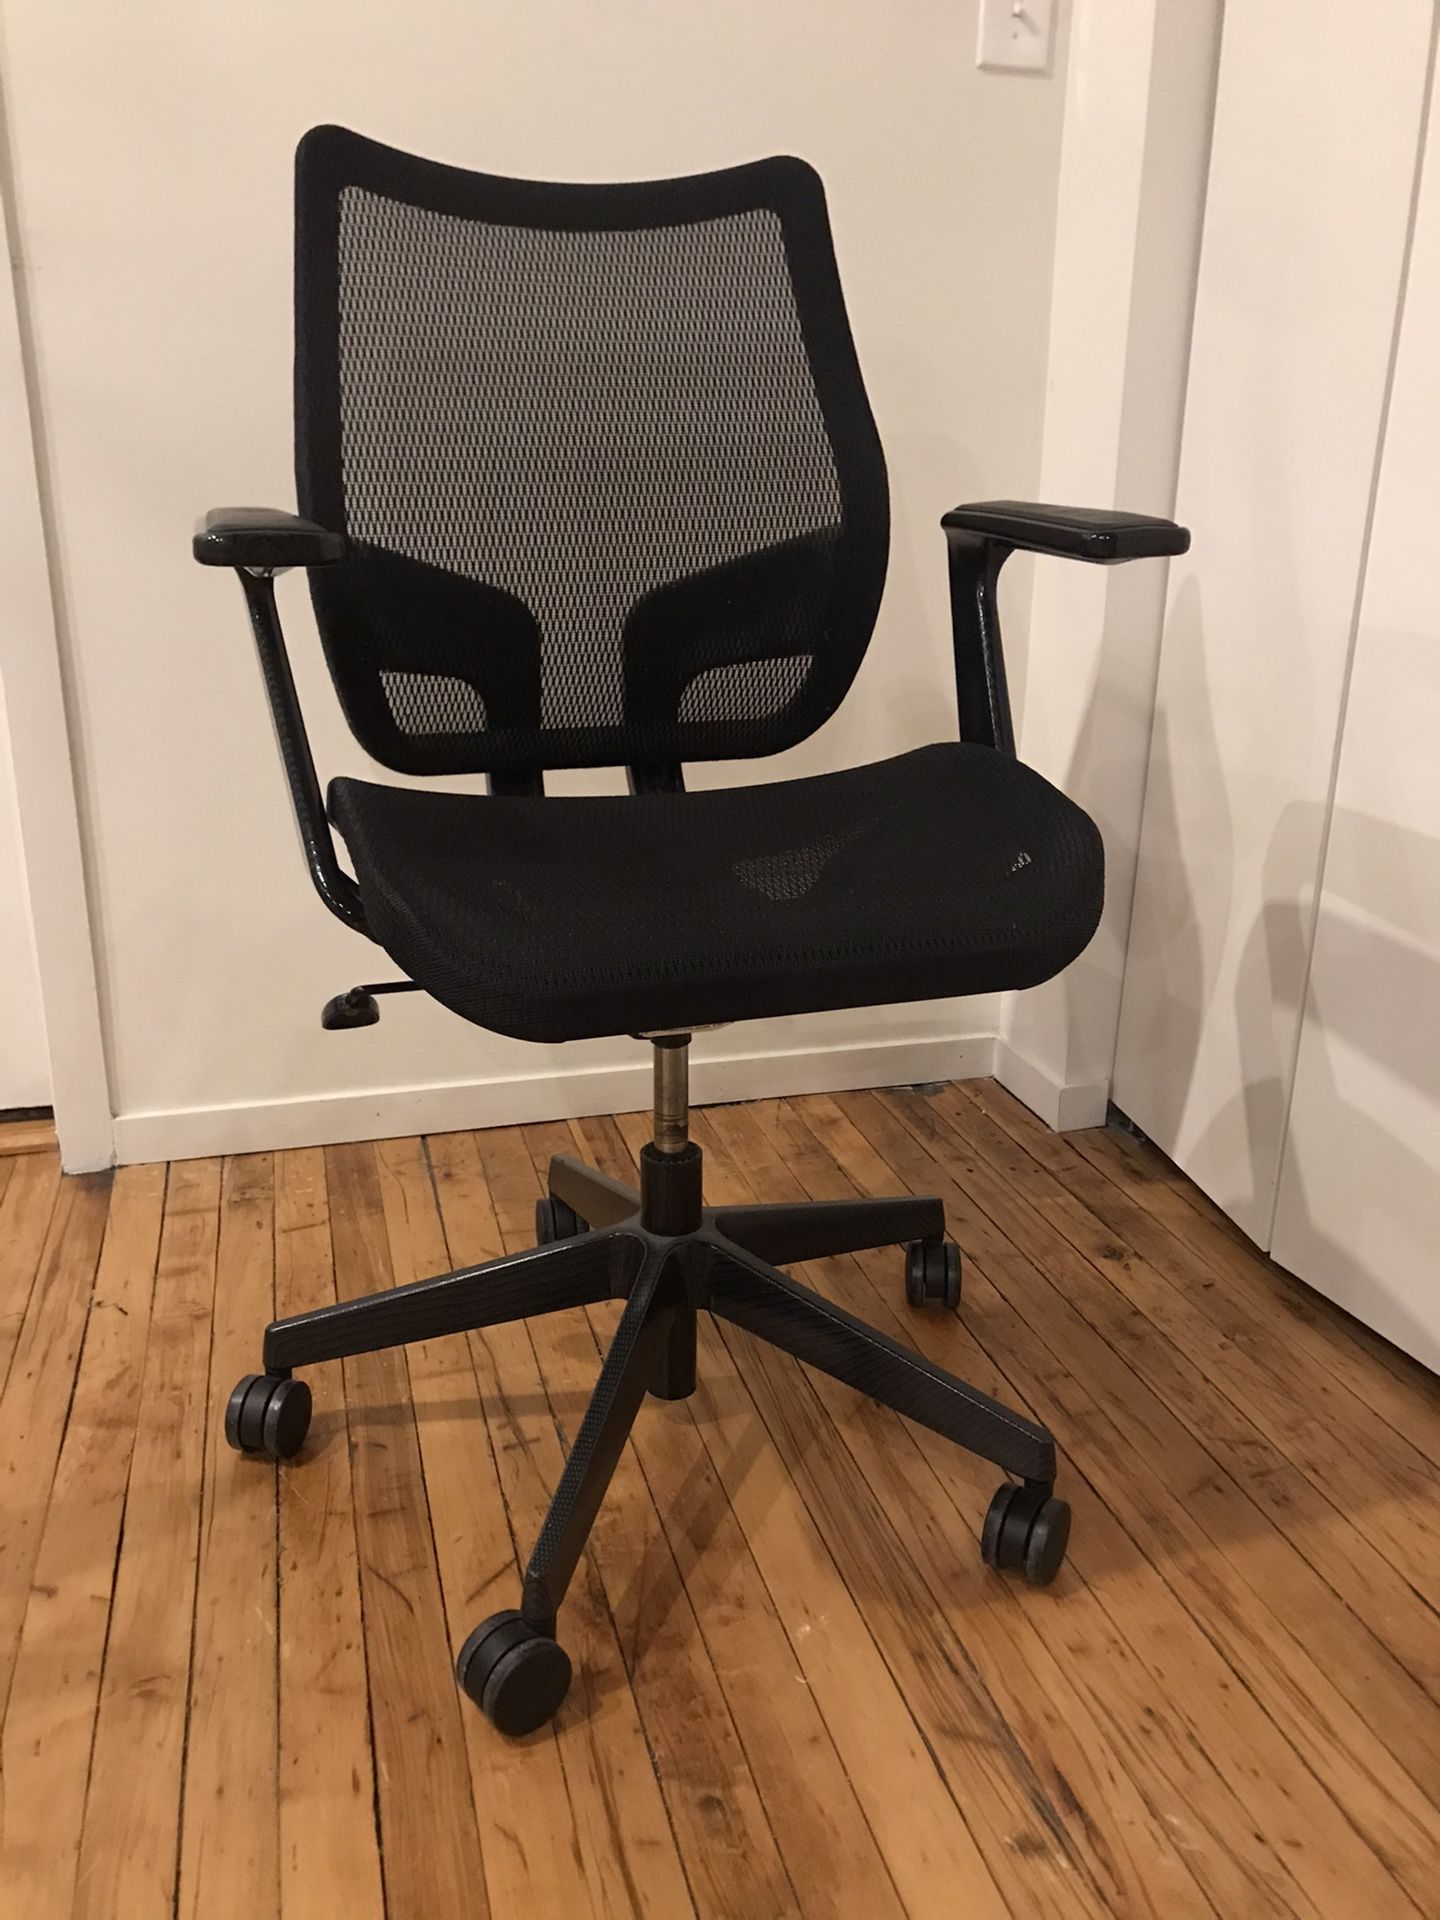 Adjustable height office chair